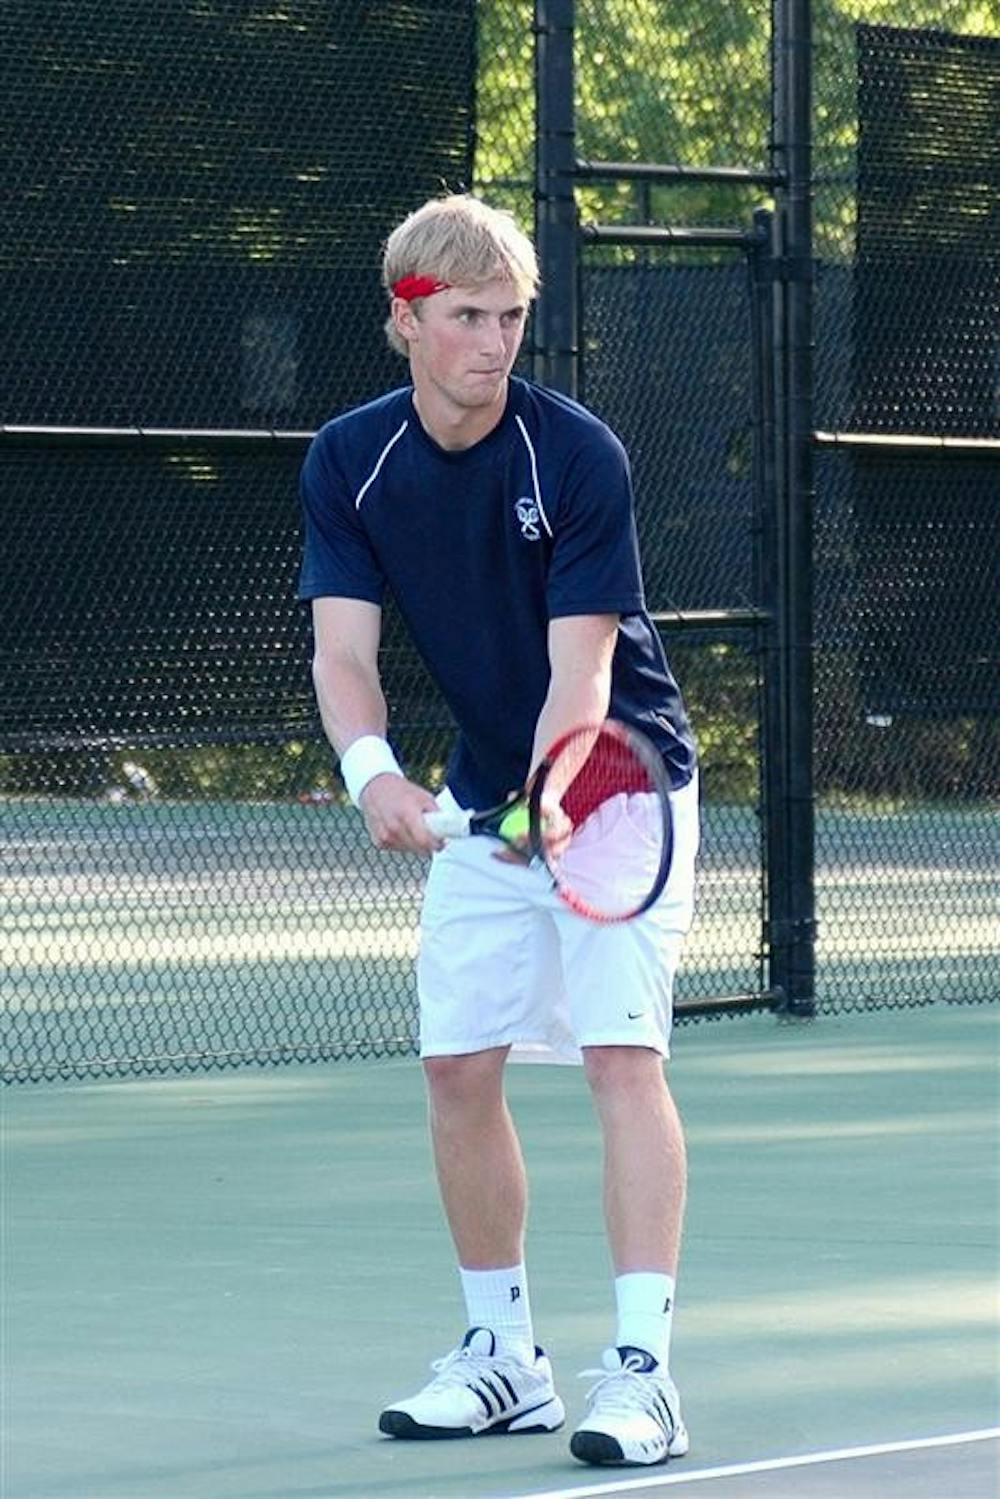 IU tennis recruit Tommy Aliber prepares to serve May 8th, 2009. Aliber is ranked No. 1 in the under-18 Missouri Valley region.